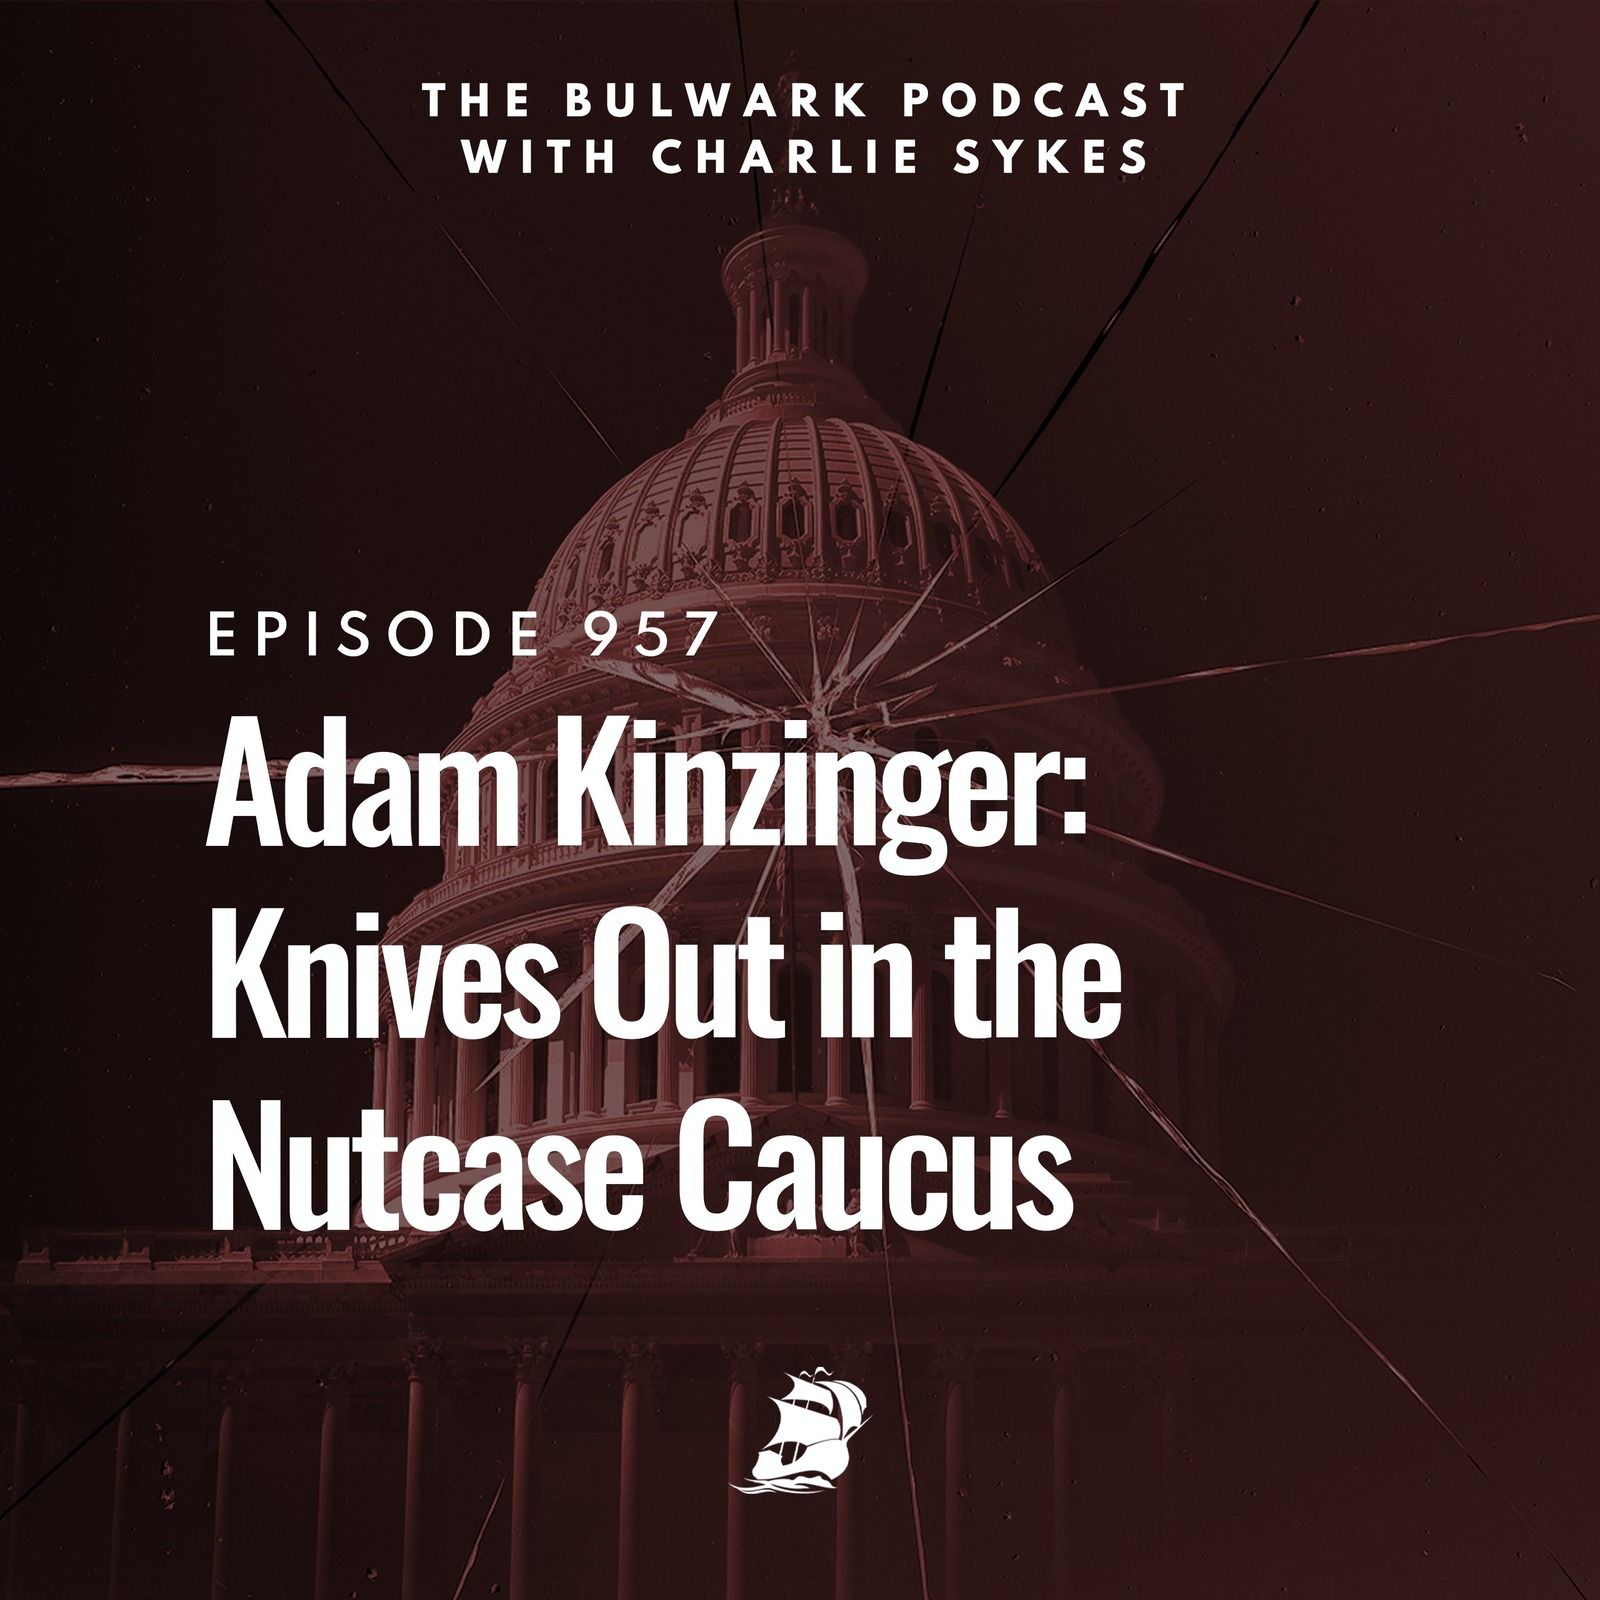 Adam Kinzinger: Knives Out in the Nutcase Caucus